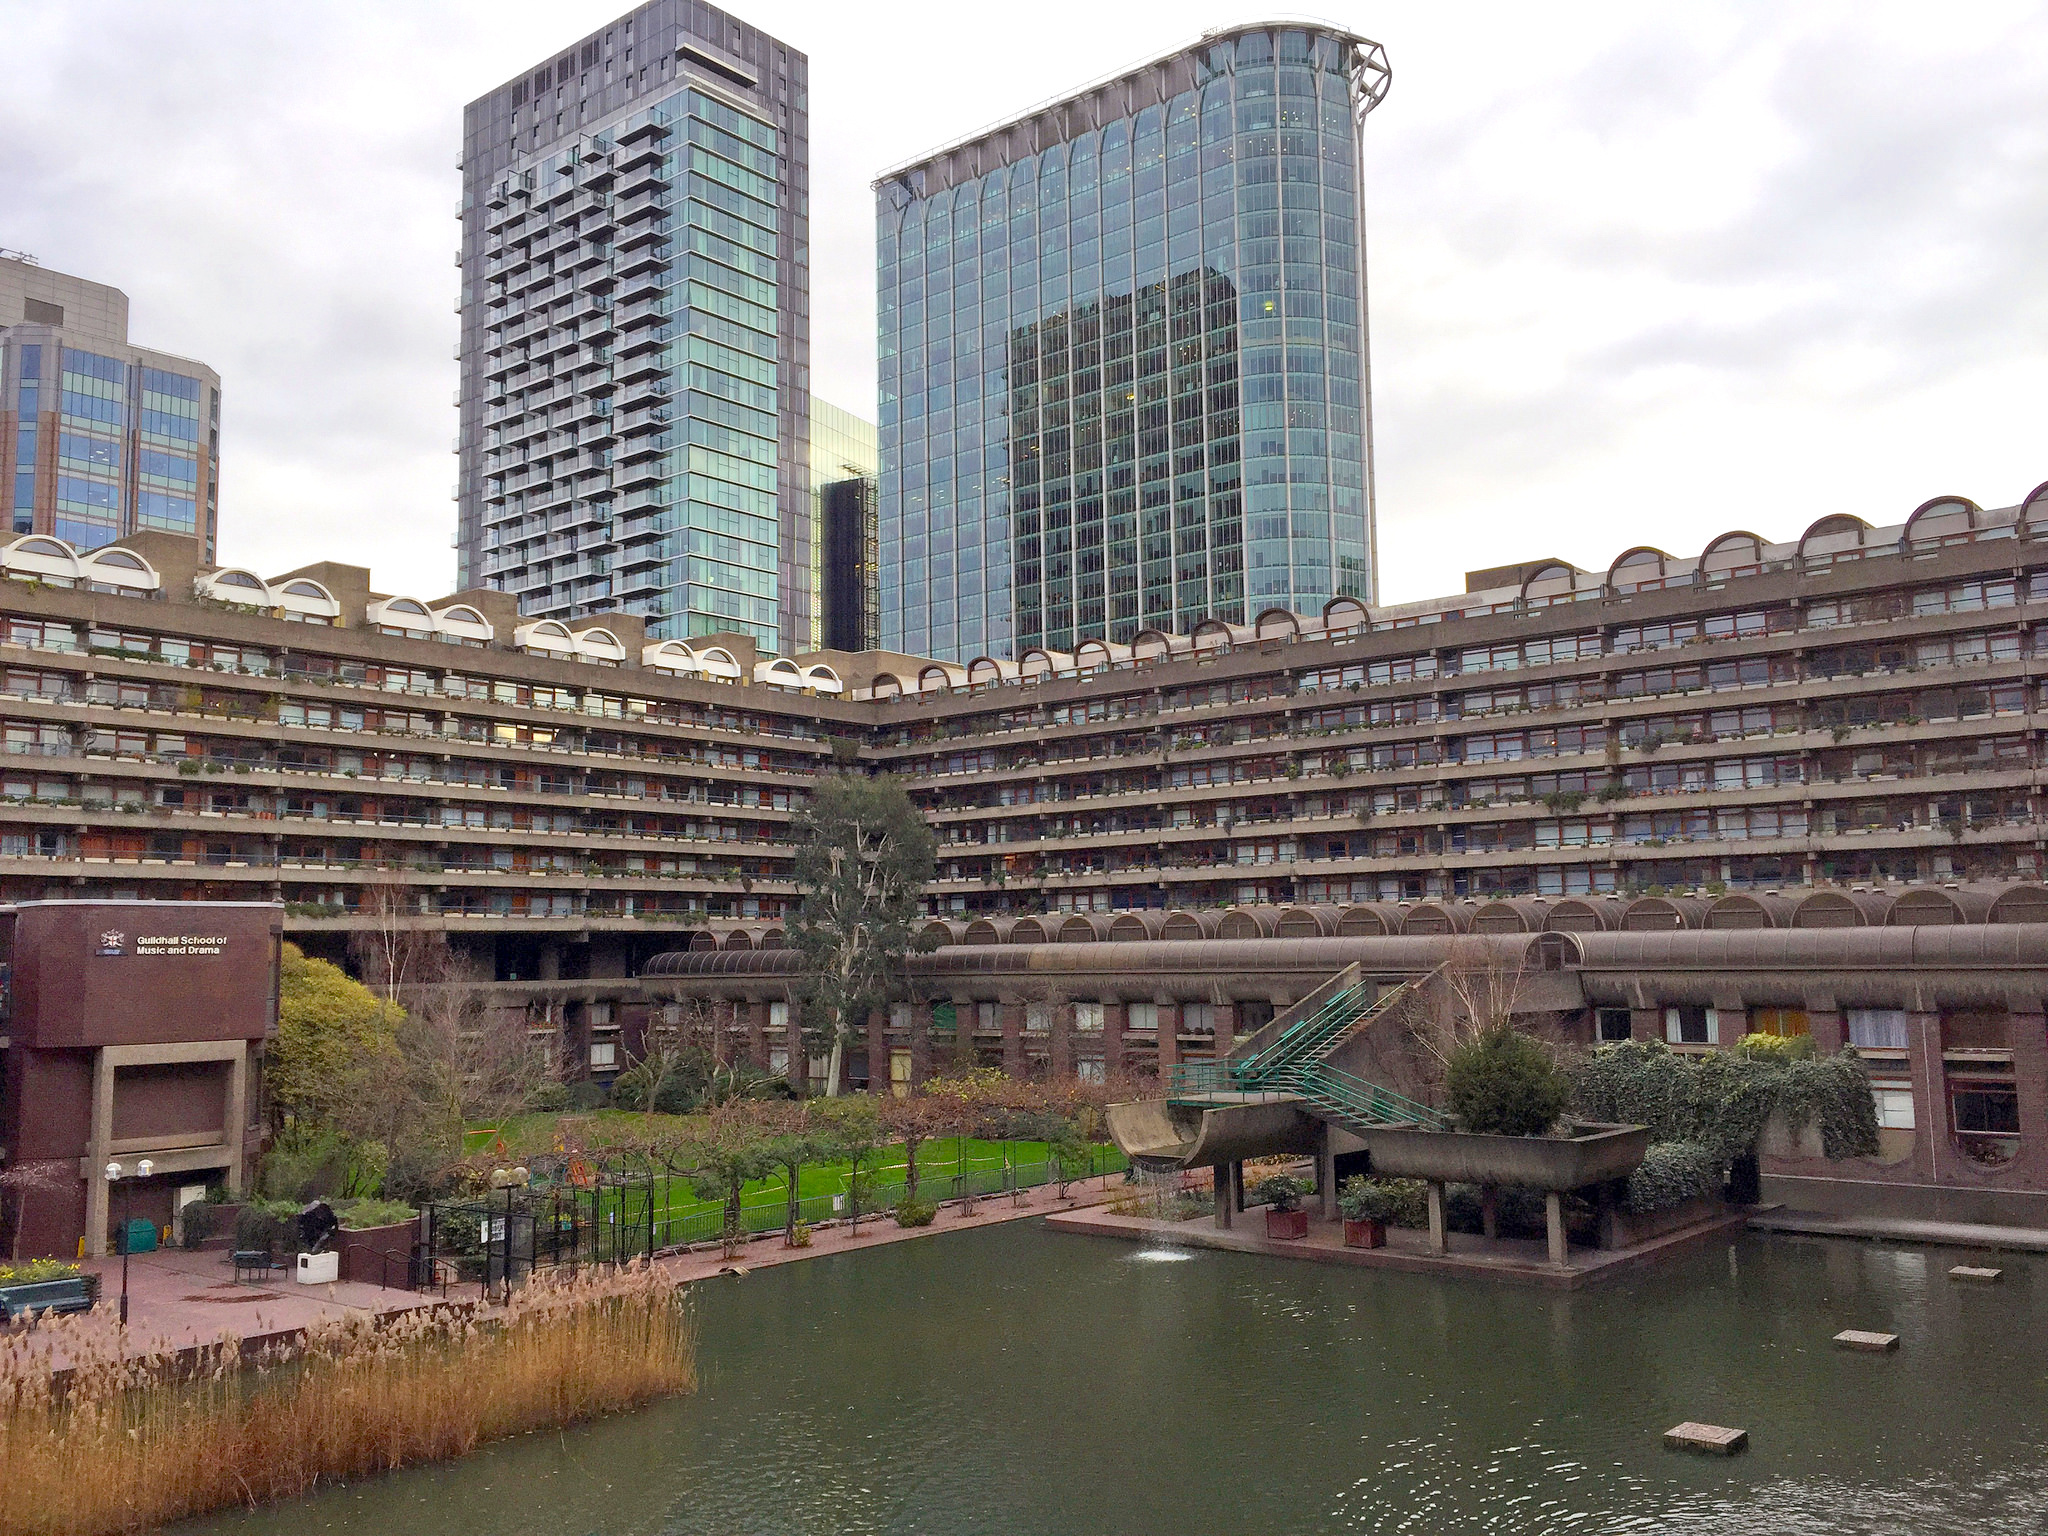 photograph showing two sides of the housing enclosure, a large water feature, and a park within the Barbican